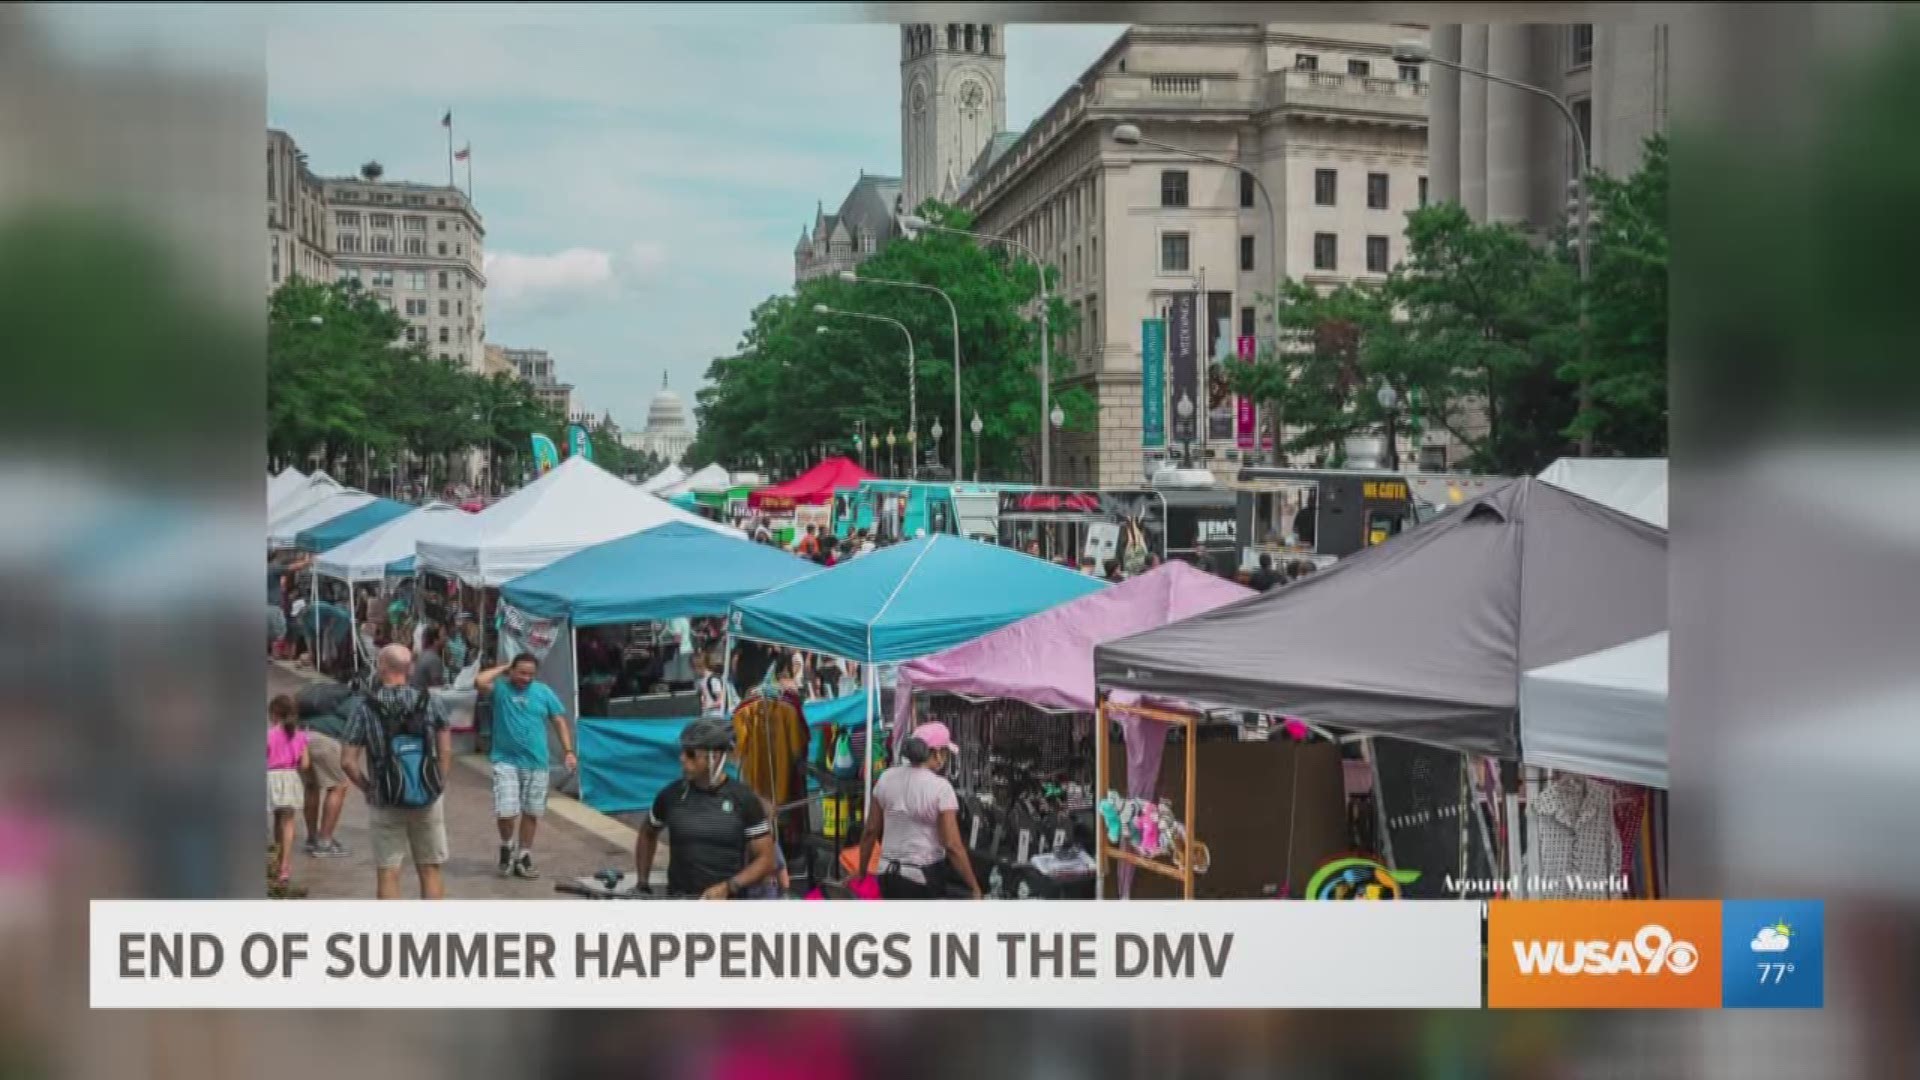 August signifies the ending of summer, but that doesn't mean the fun has to stop! Anne Kim-Dannibale, editor of Where Traveler, shares the top things to do in the DMV to end your summer with a bang.